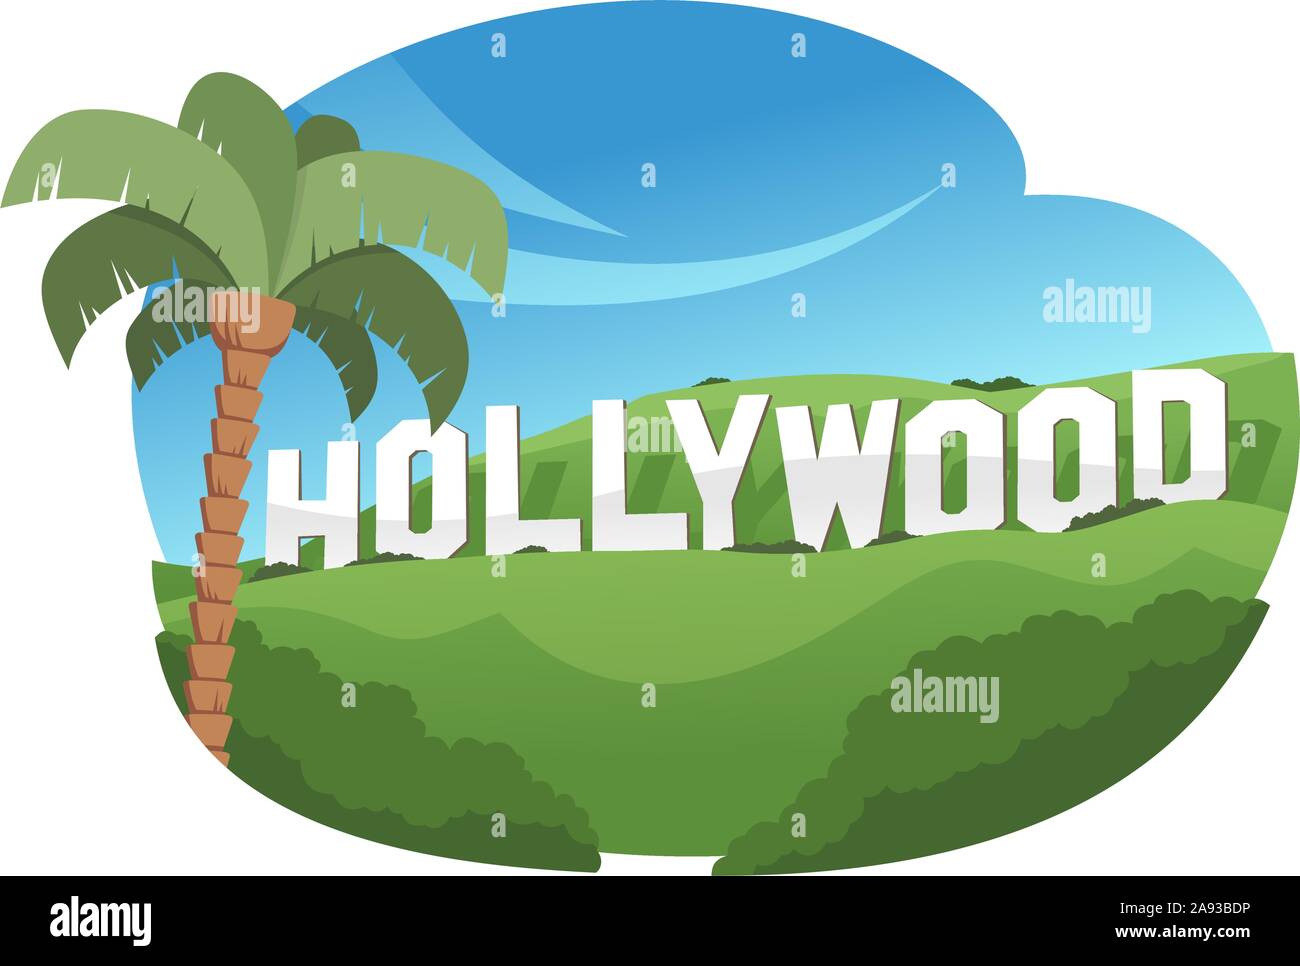 Hollywood Hills Sign Vector